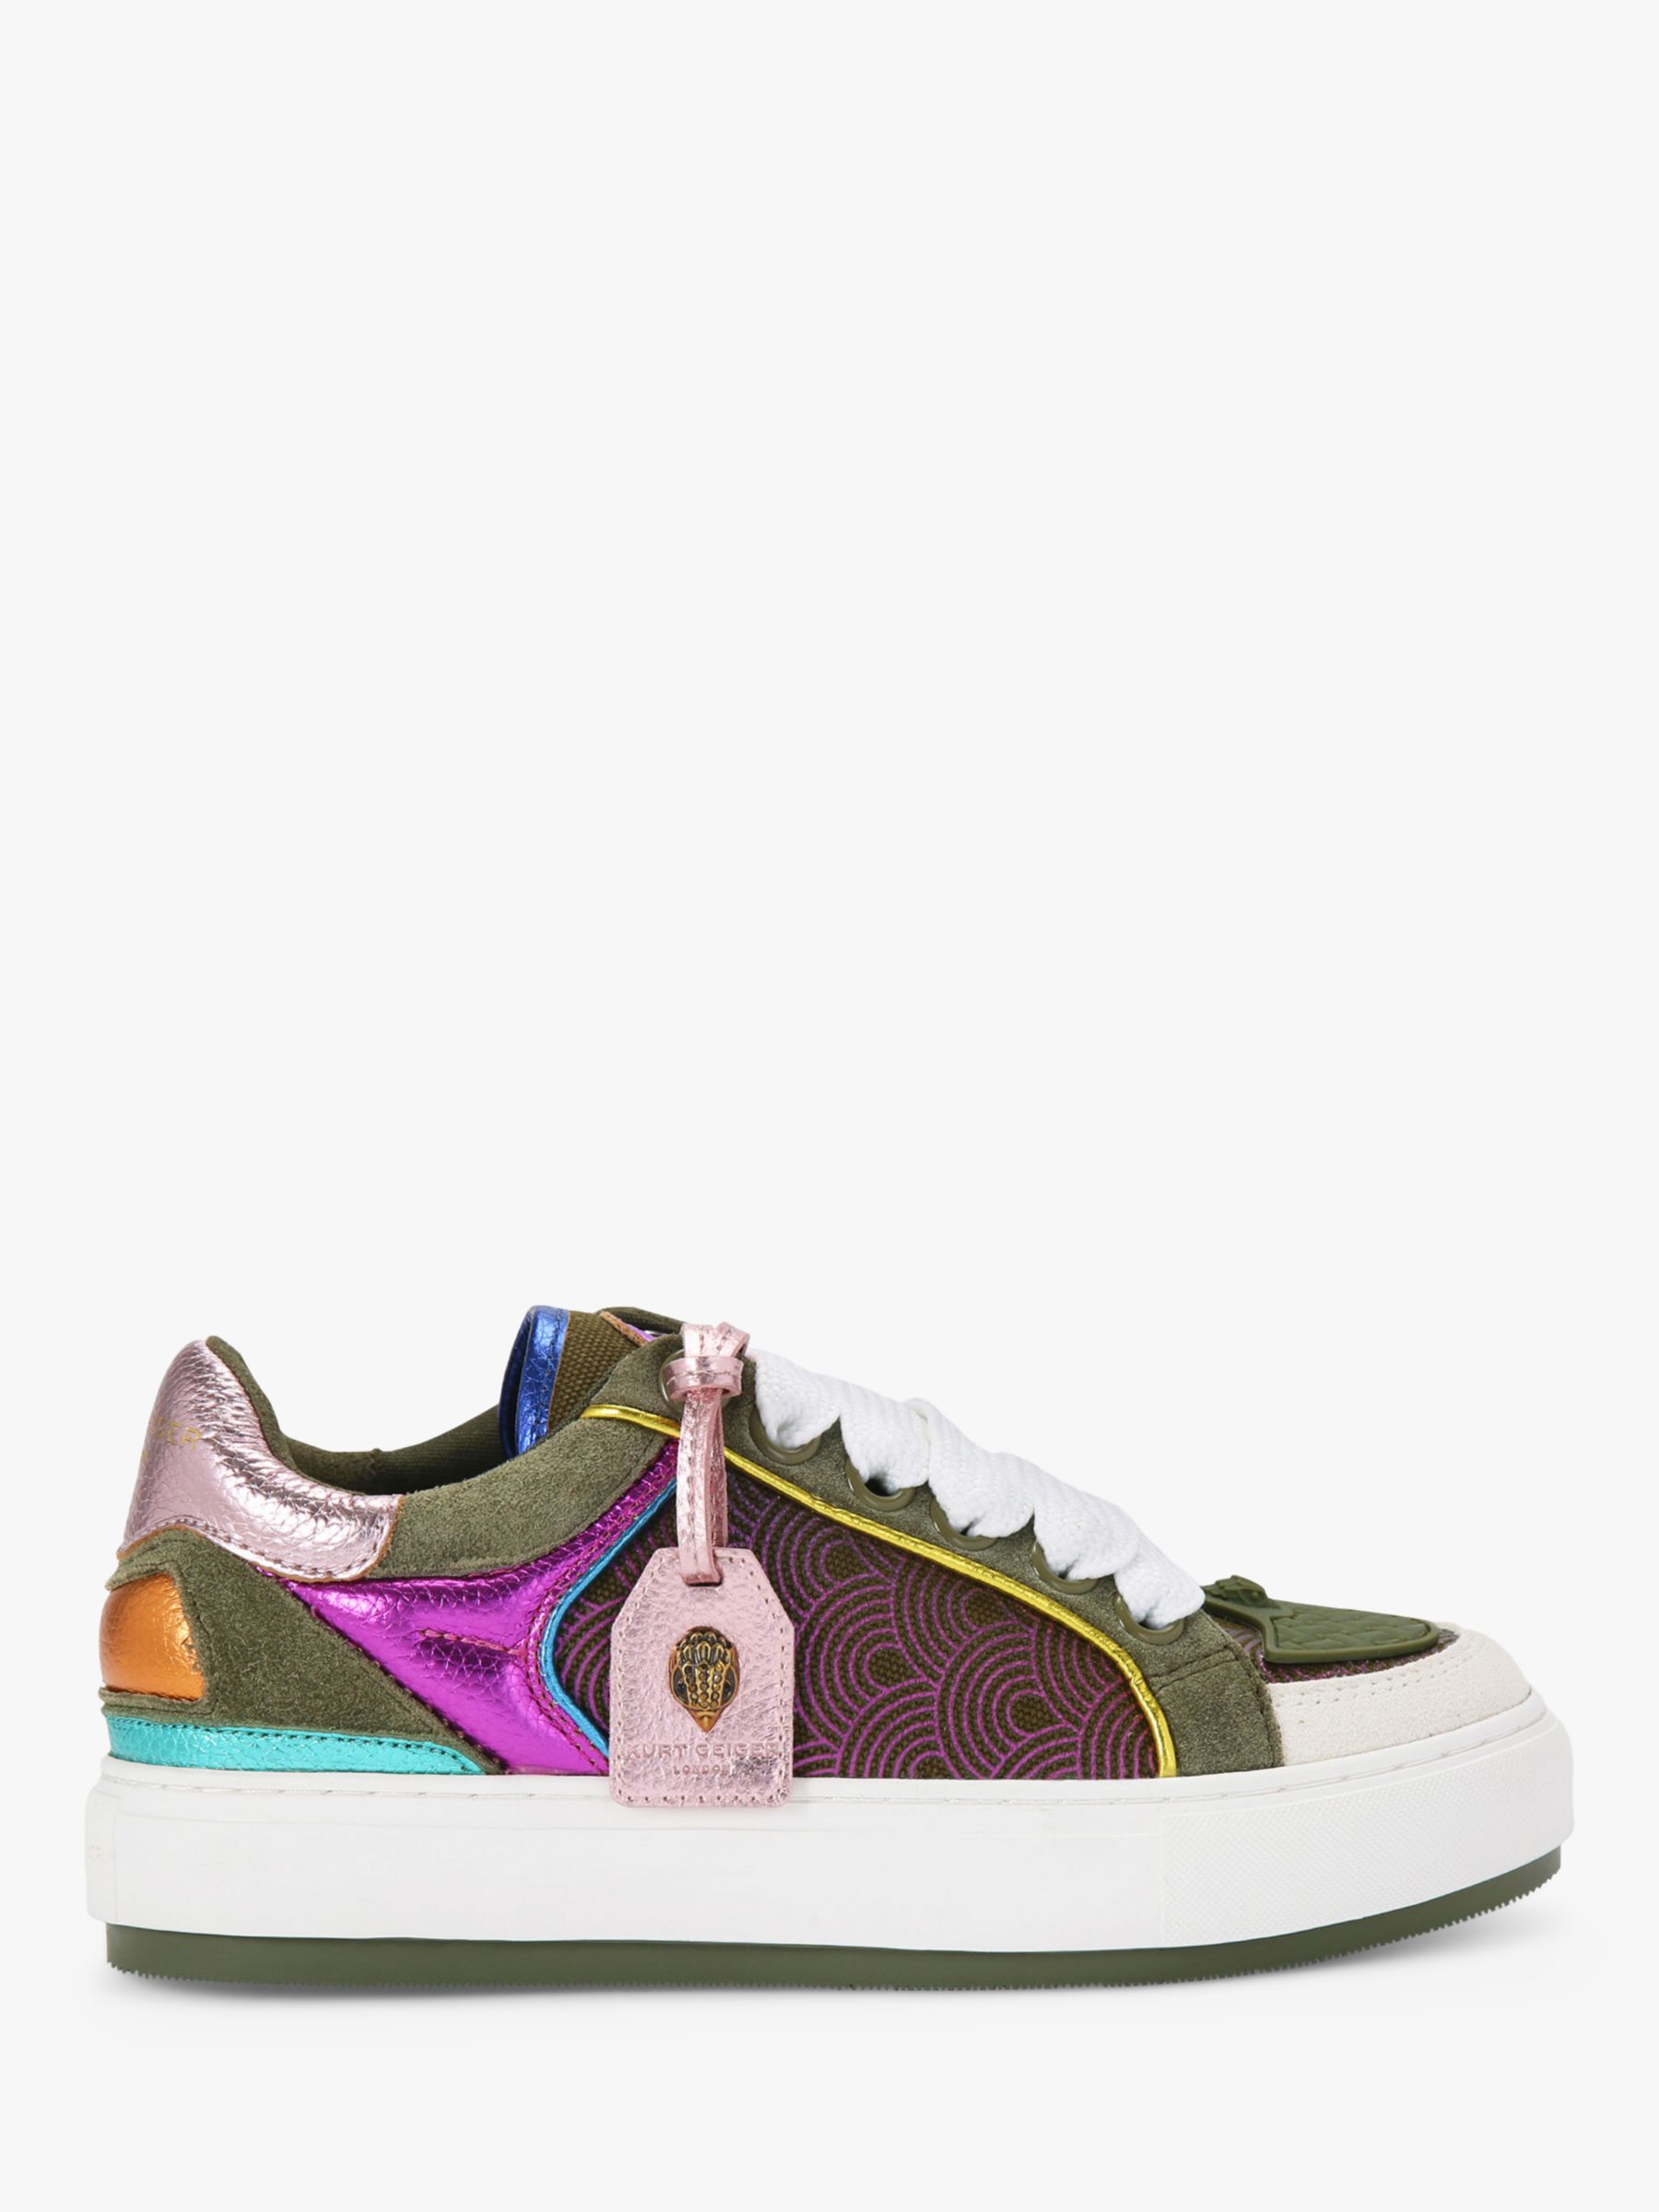 Kurt Geiger London Southbank Tag Leather Trainers, Green Multi Green at ...